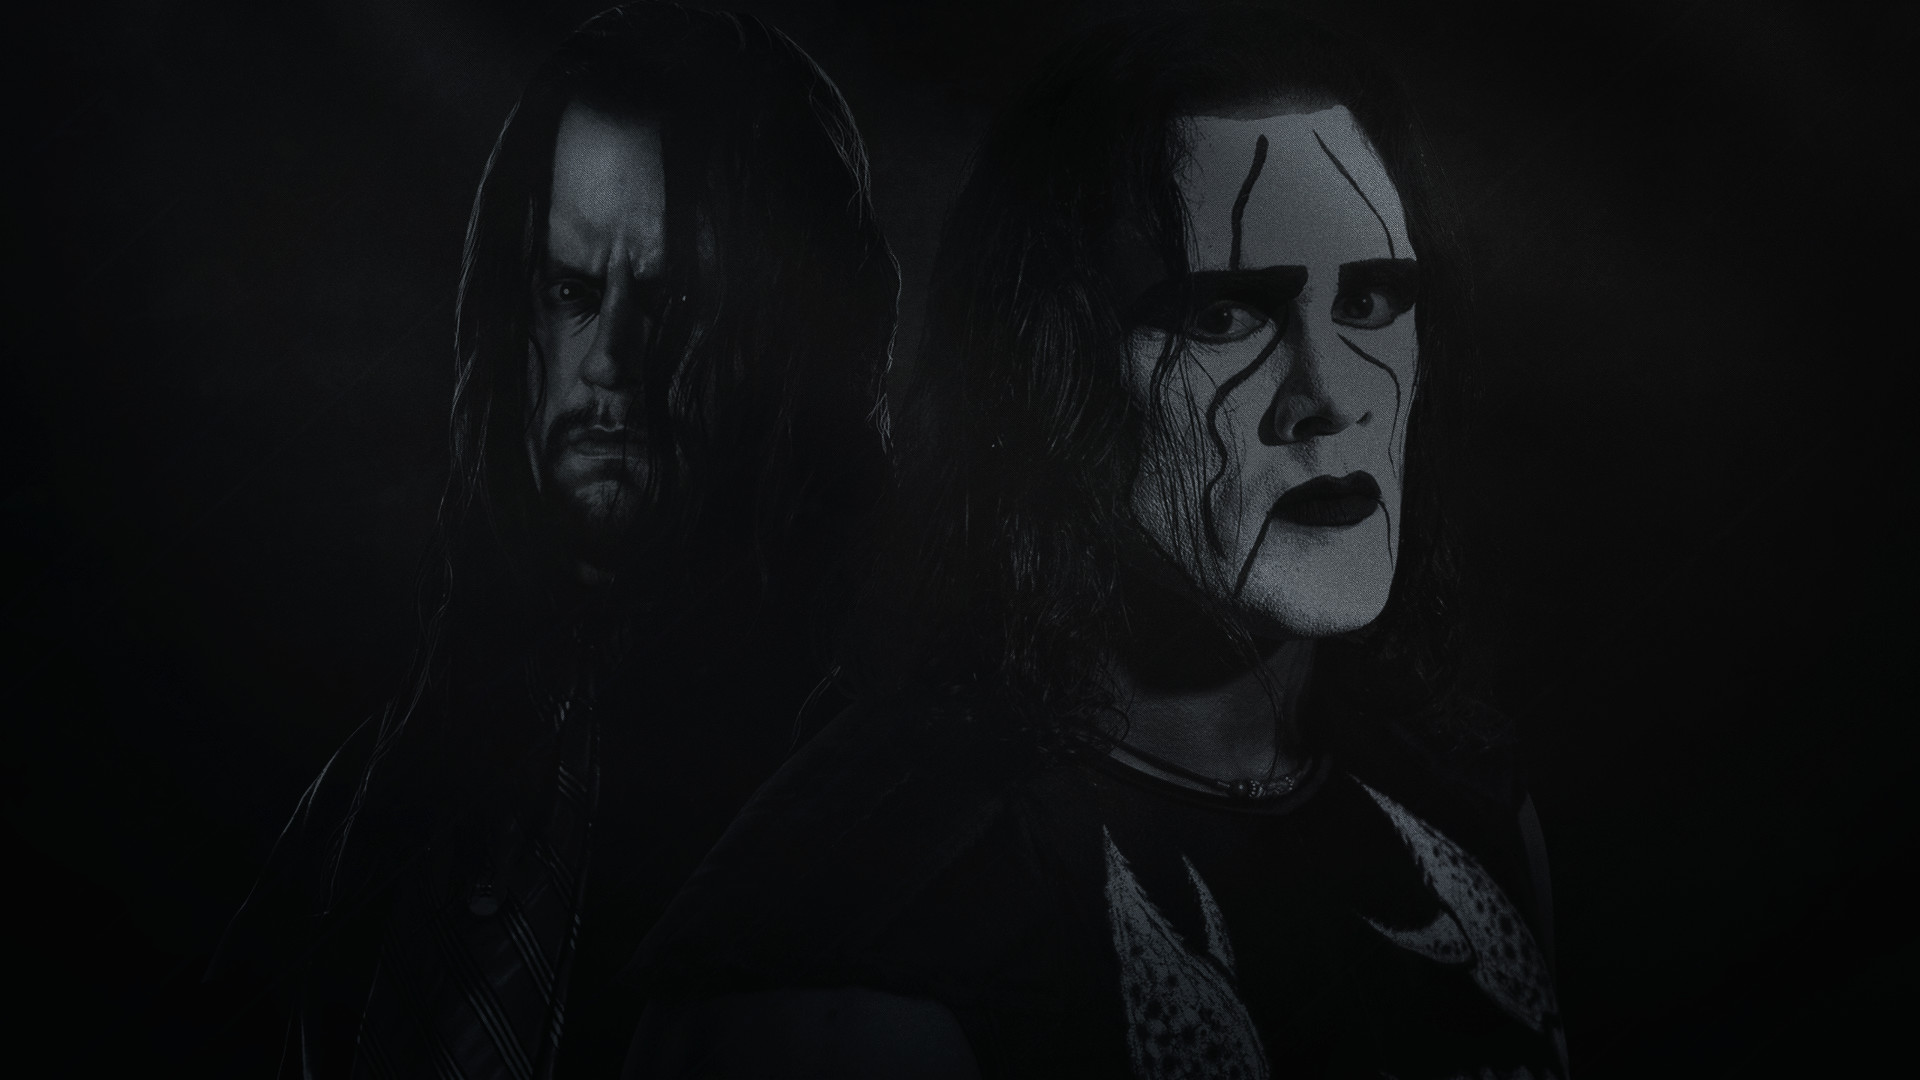 1920x1080 ... The Undertaker VS Sting Wallpaper(Ethereal)() by EtherealEdition